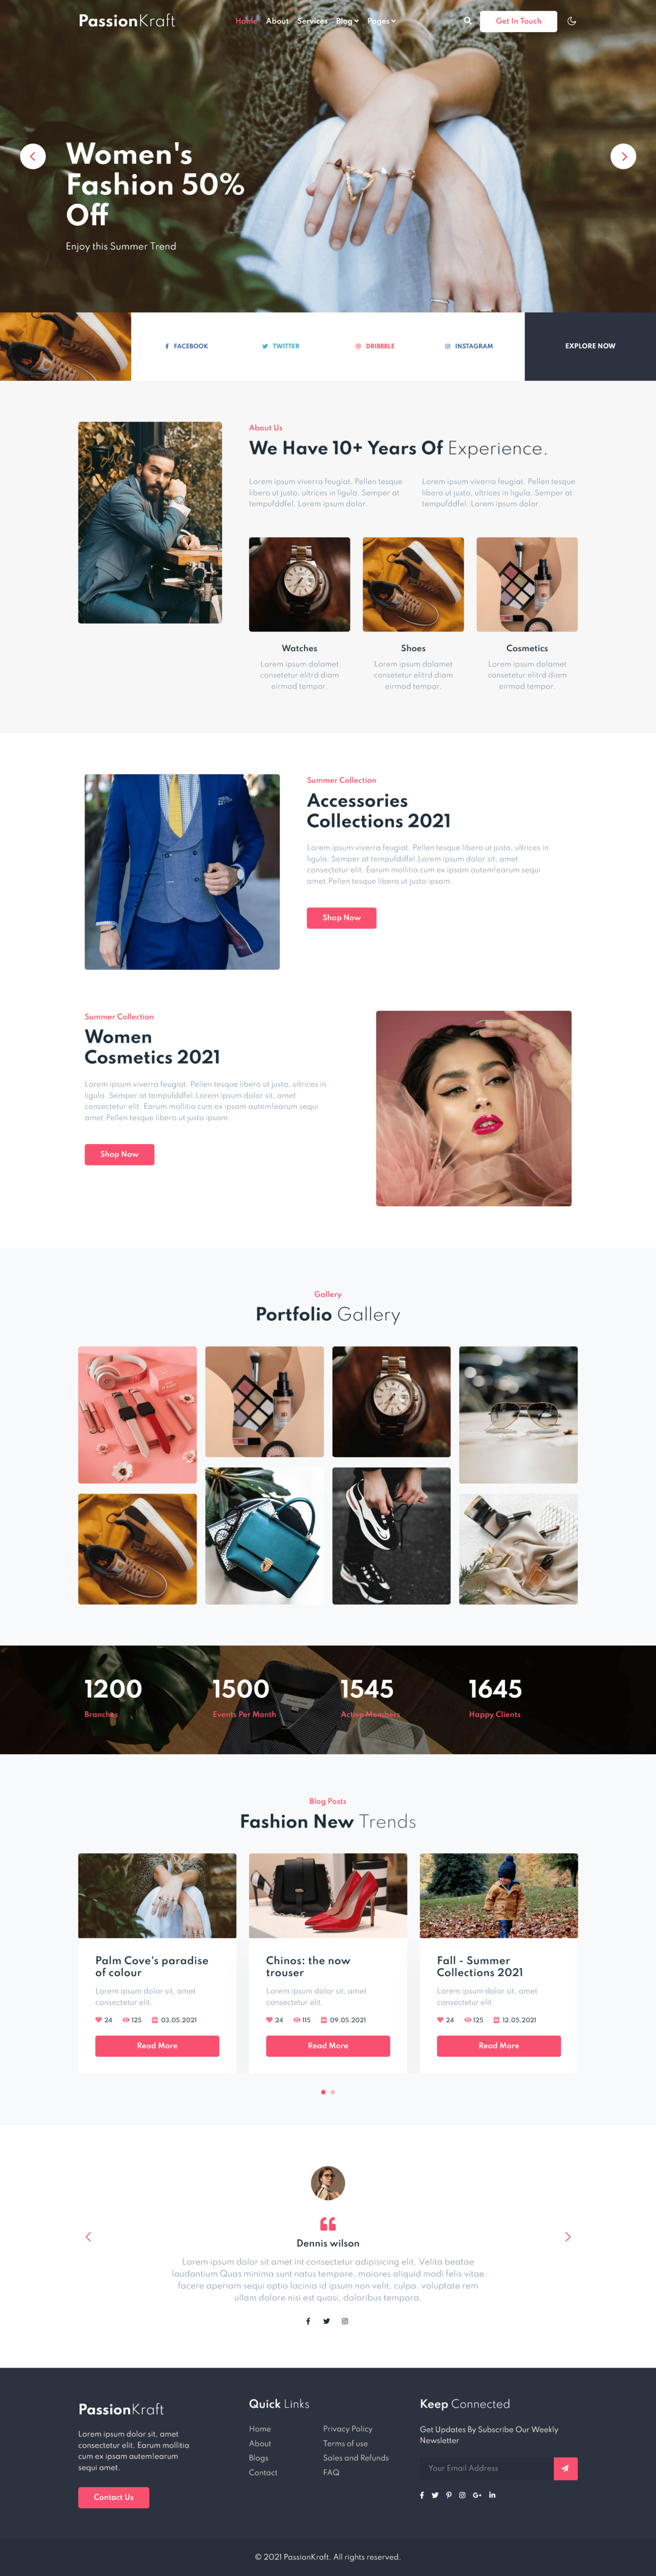 Passion kraft a fashion category website template - Home Page